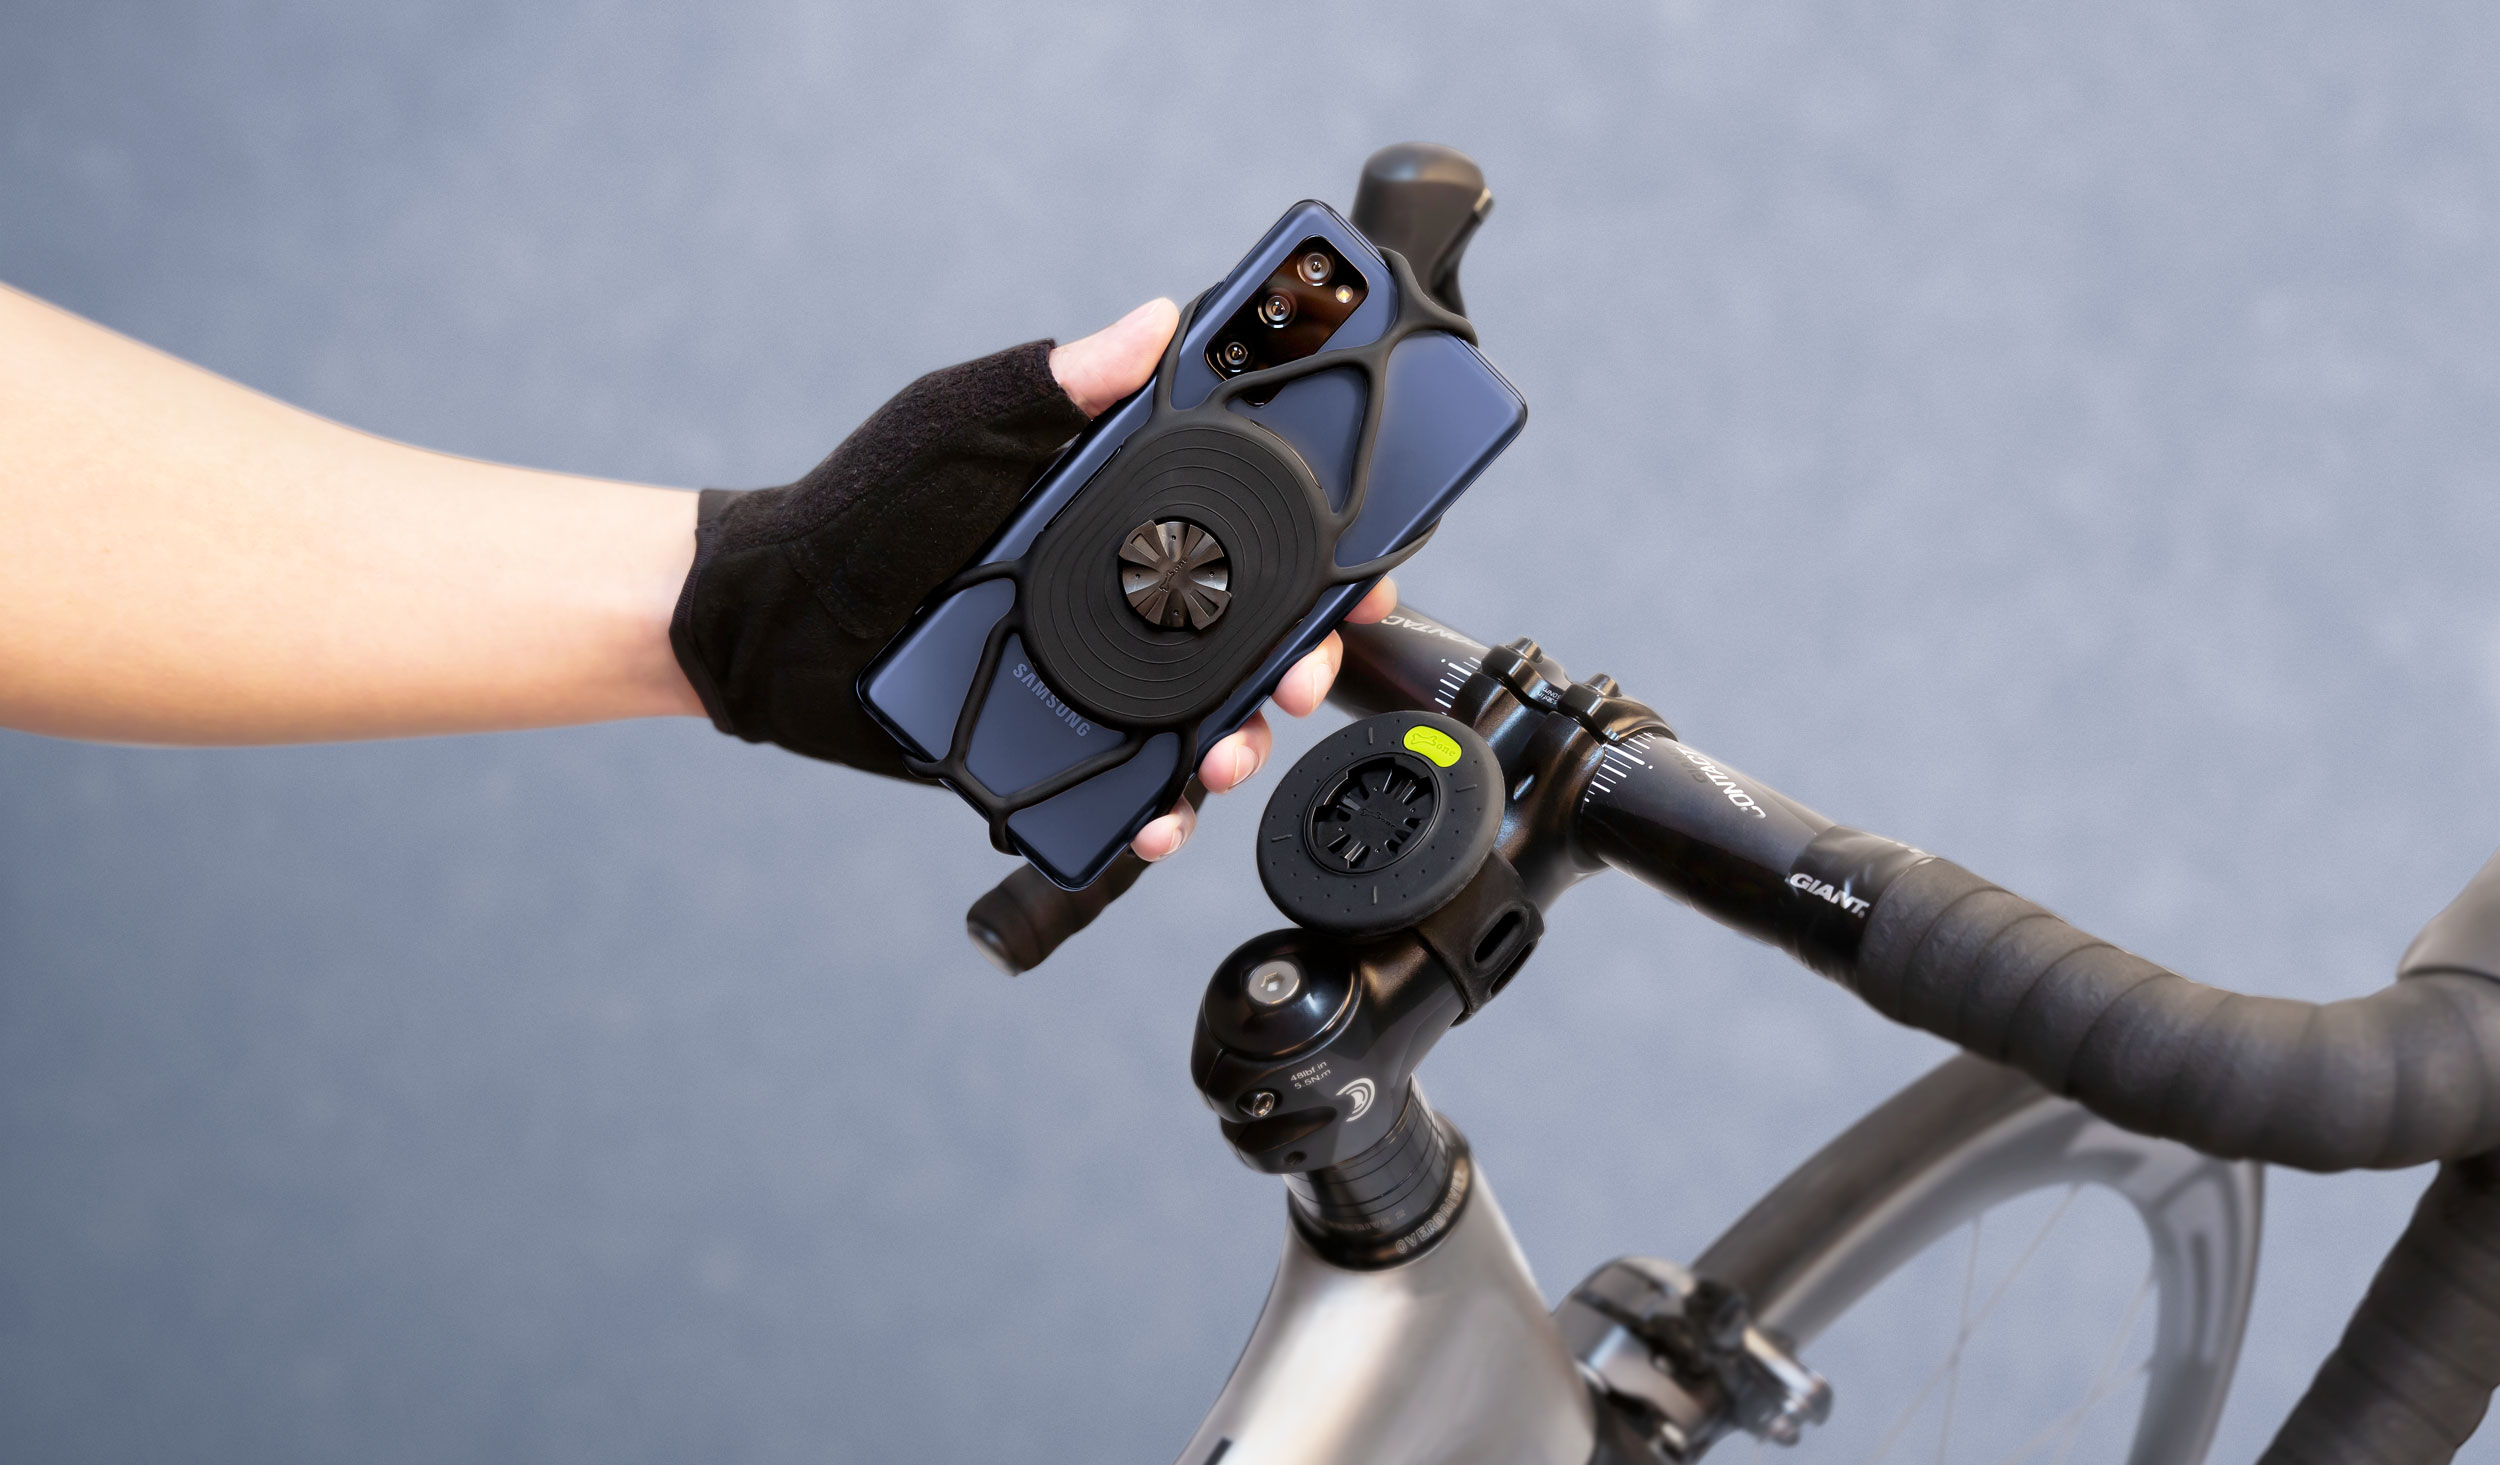 Port Telephone Velo Support Telephone Trotinette Electrique Accessoire Velo pour Guidon Velo 5,8 à 7,2’ iPhone 13 12 11 X XS XR Samsung Huawei Pixel Bone Bike Tie 3 Support Telephone Velo 